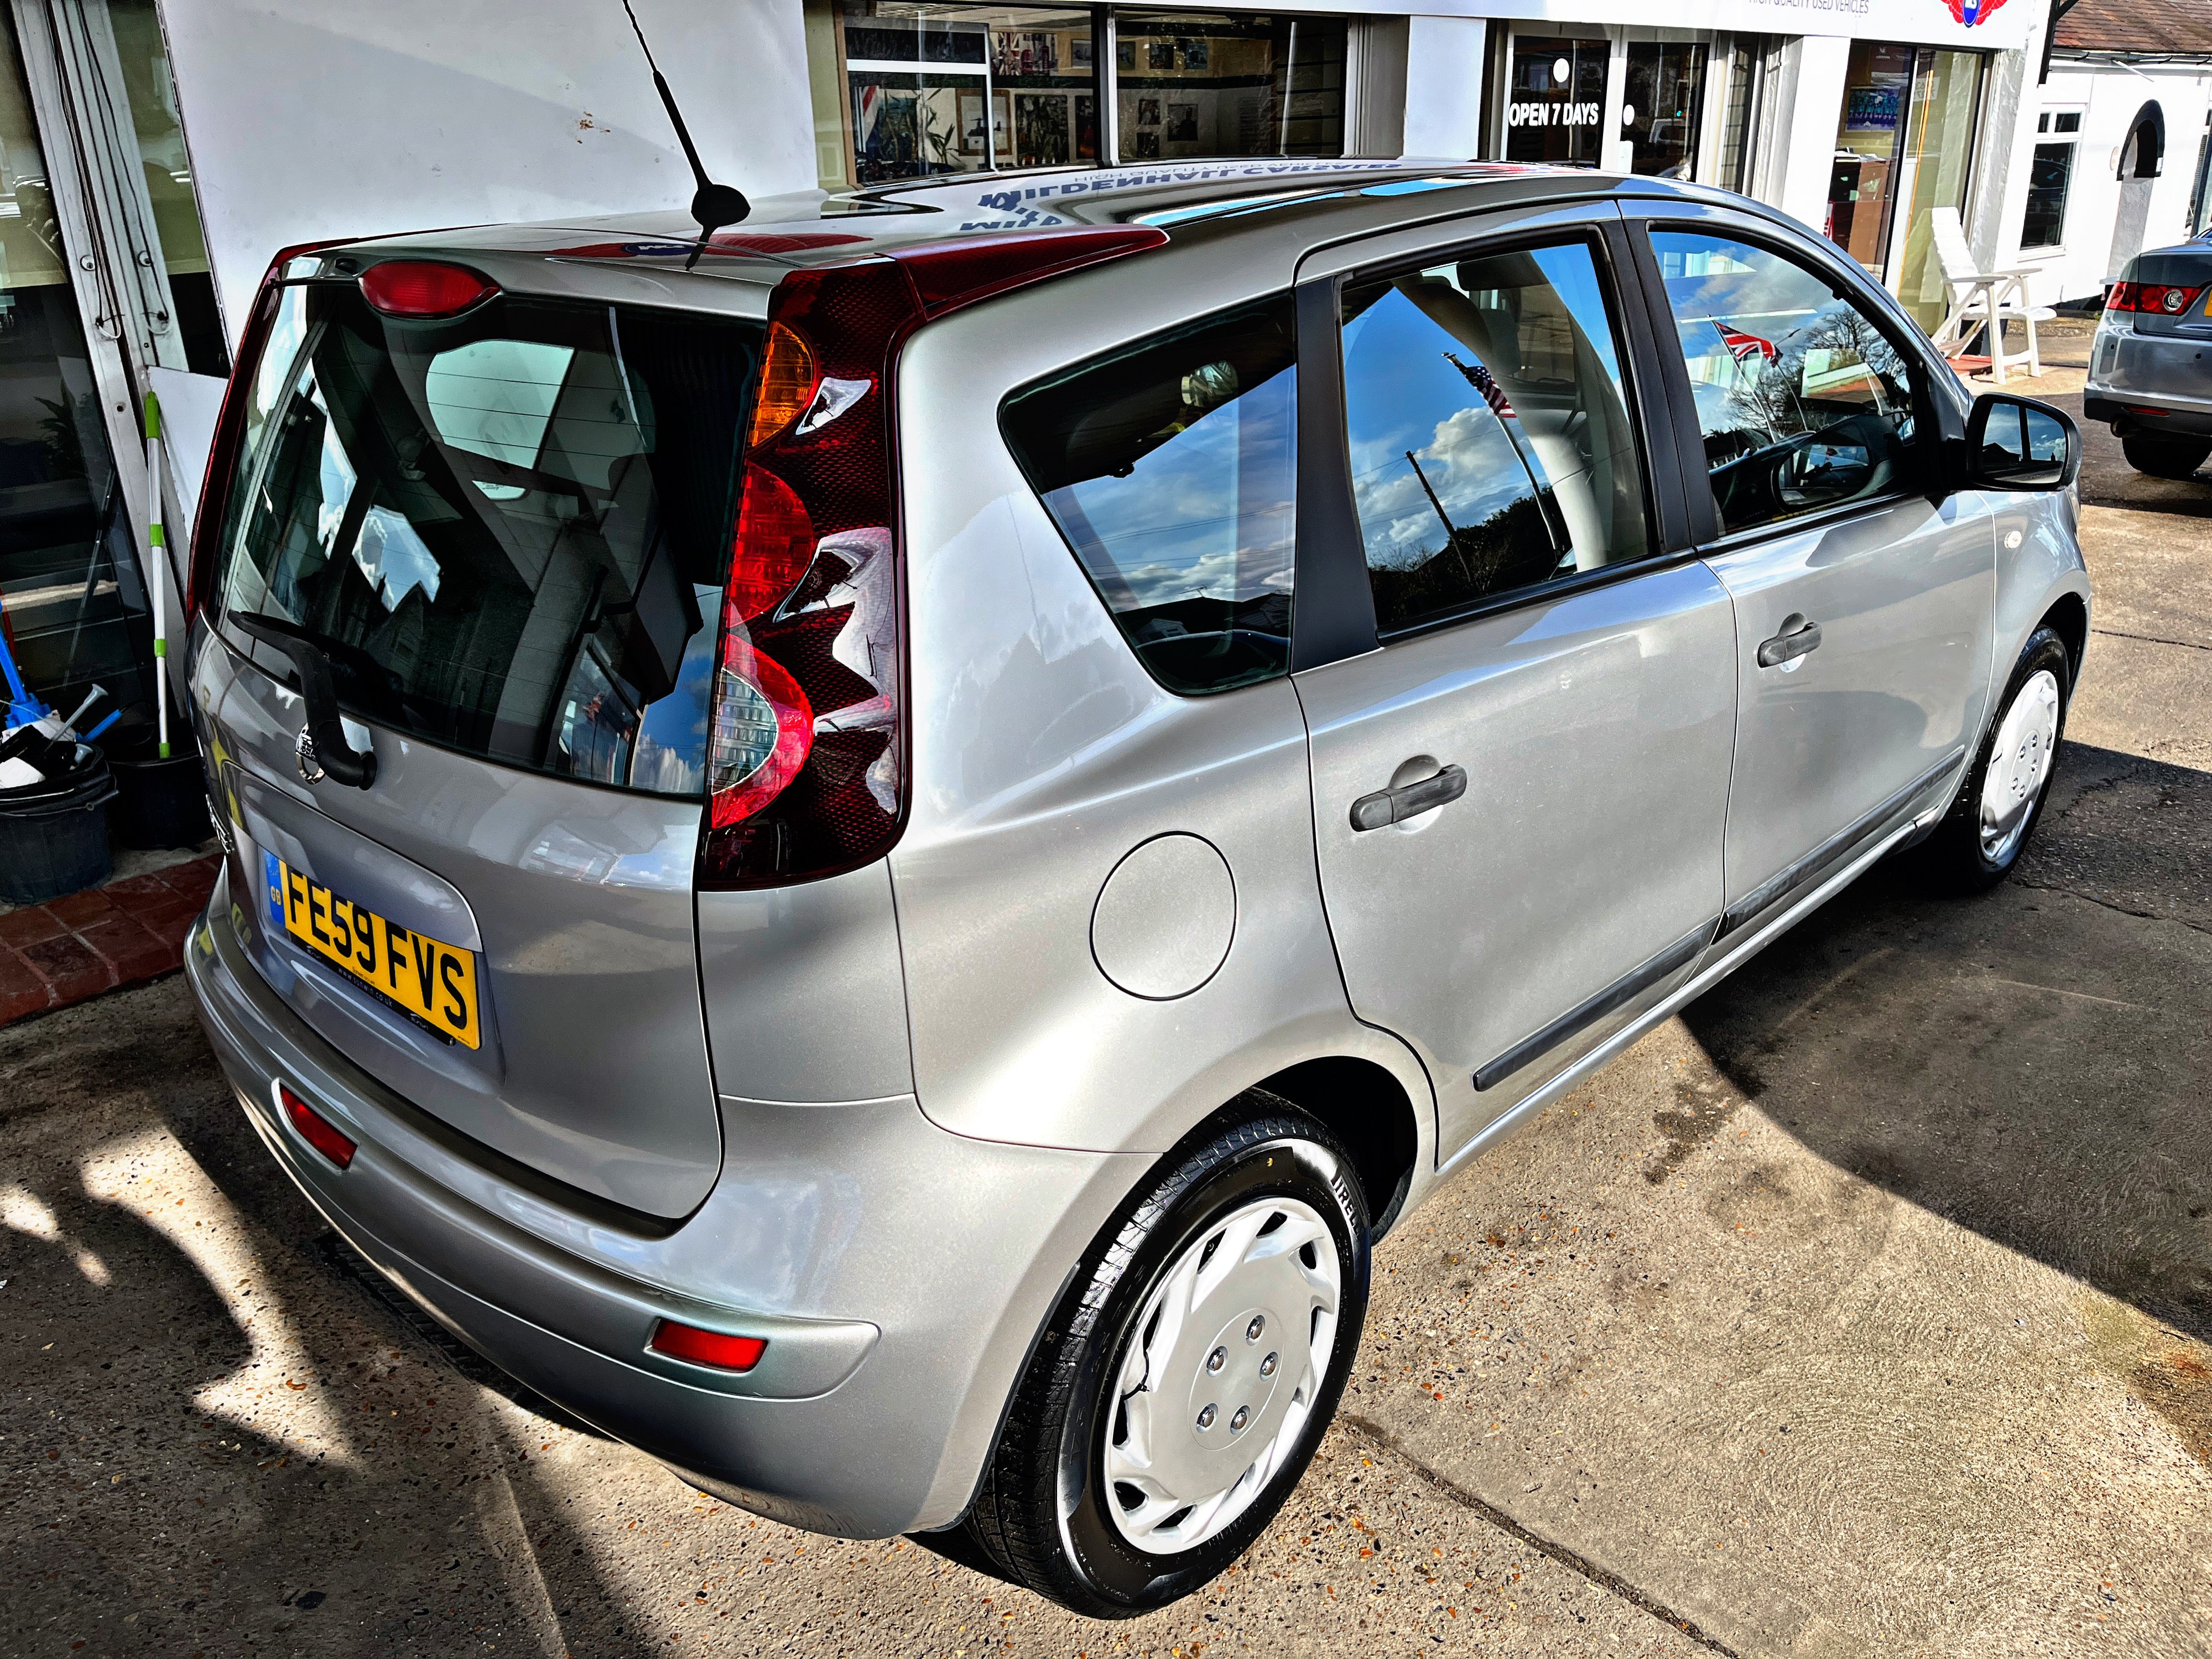 Nissan Note 1.6 Automatic LOW MILES!